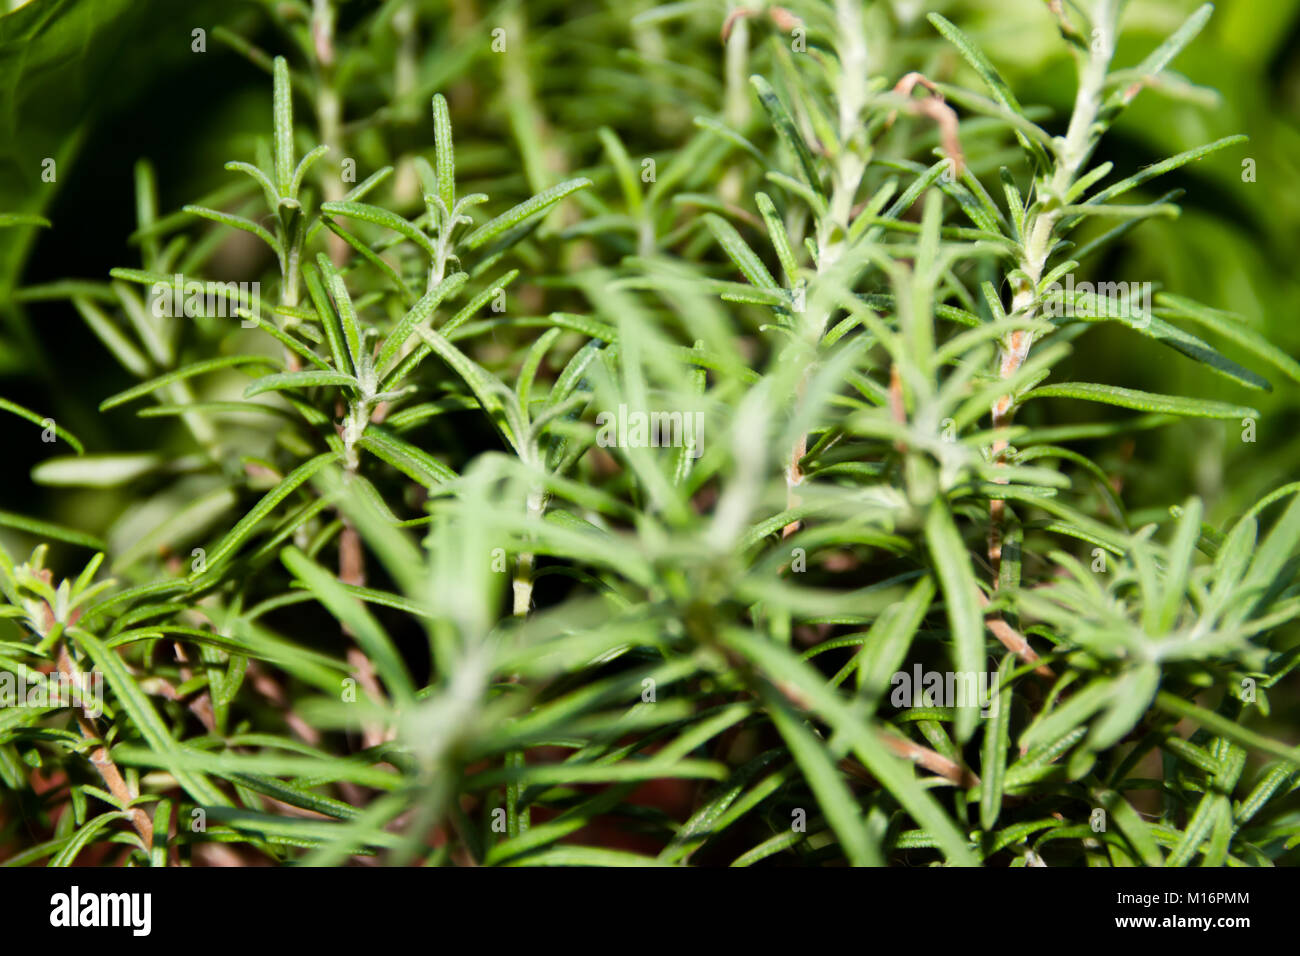 green leaves of aromatic and medicinal rosemary from the organic garden Stock Photo